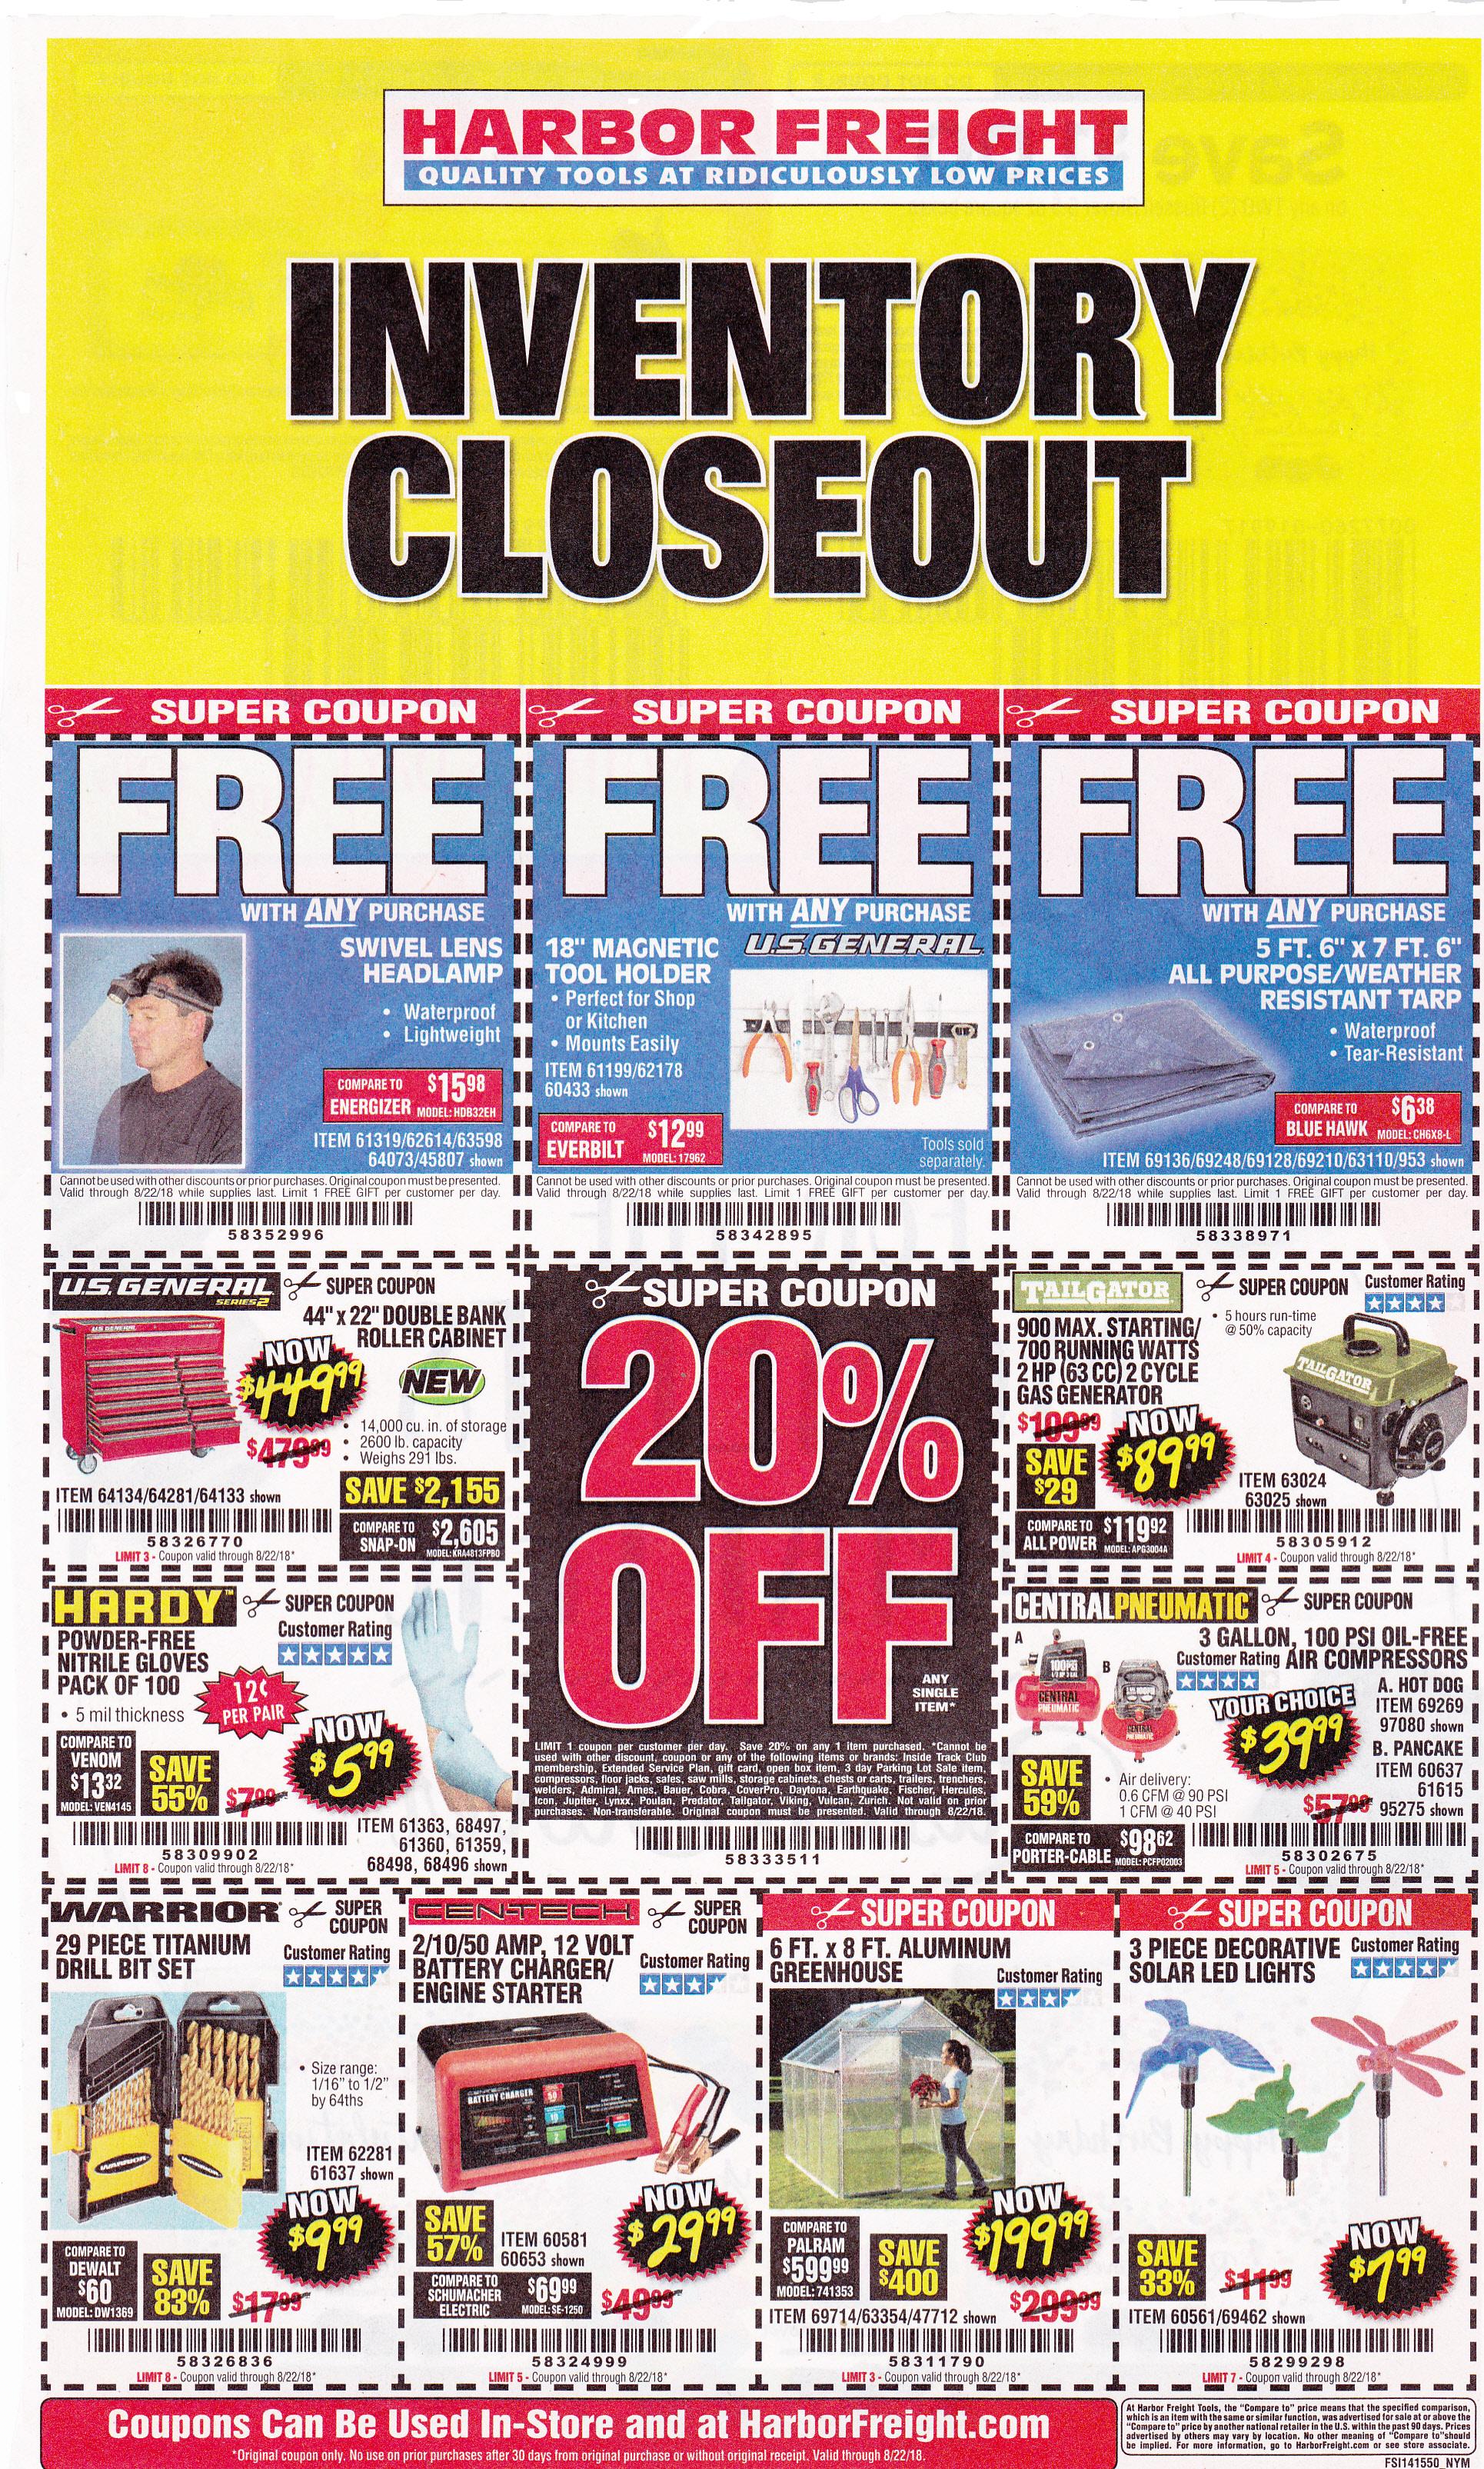 2018 Harbor Freight coupons. | Ford Explorer and Ford ...